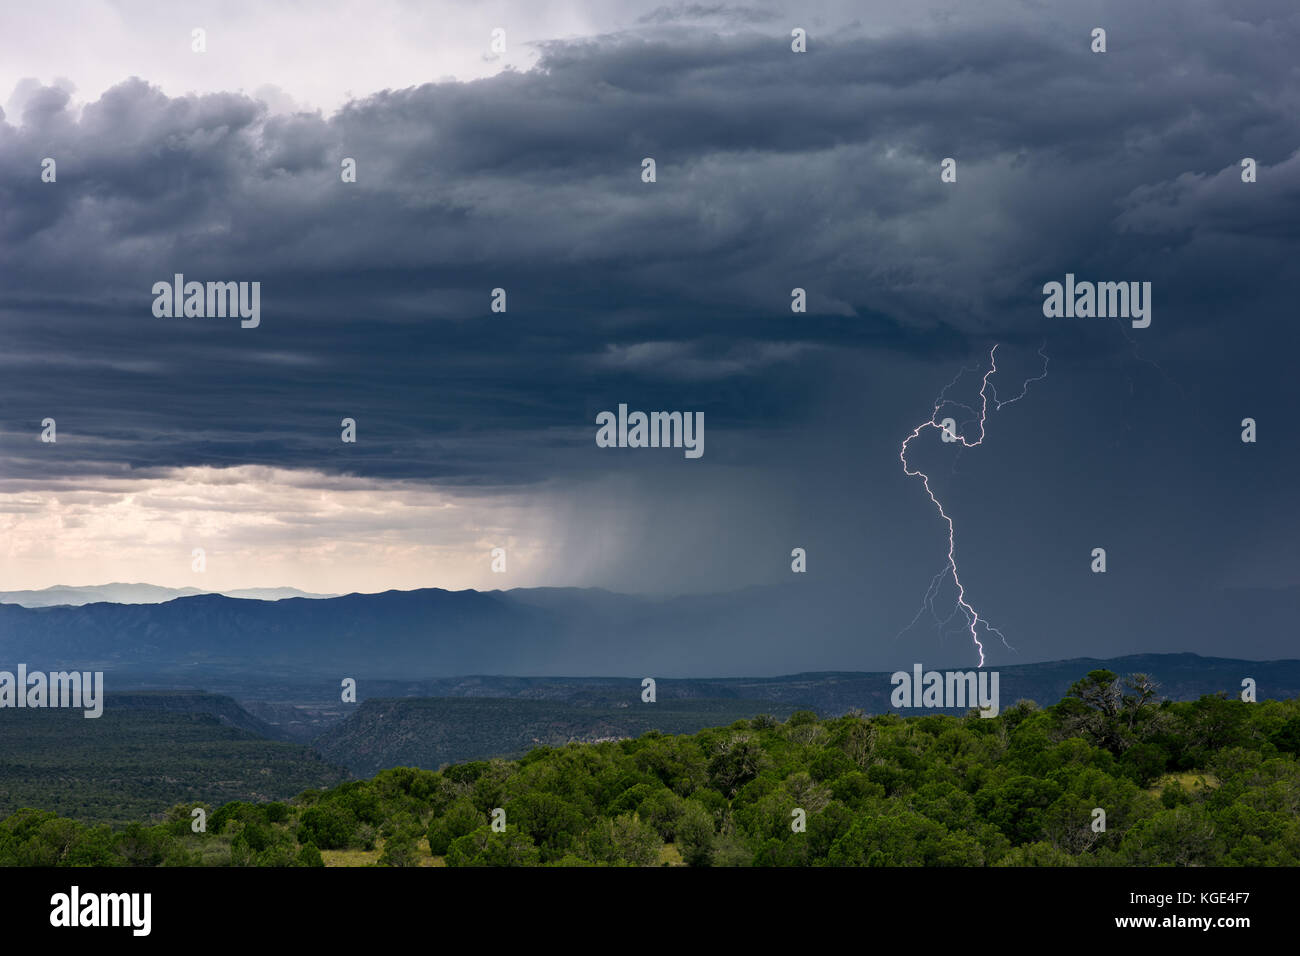 Rain falling from a thunderstorm with lightning strike and dark storm clouds Stock Photo